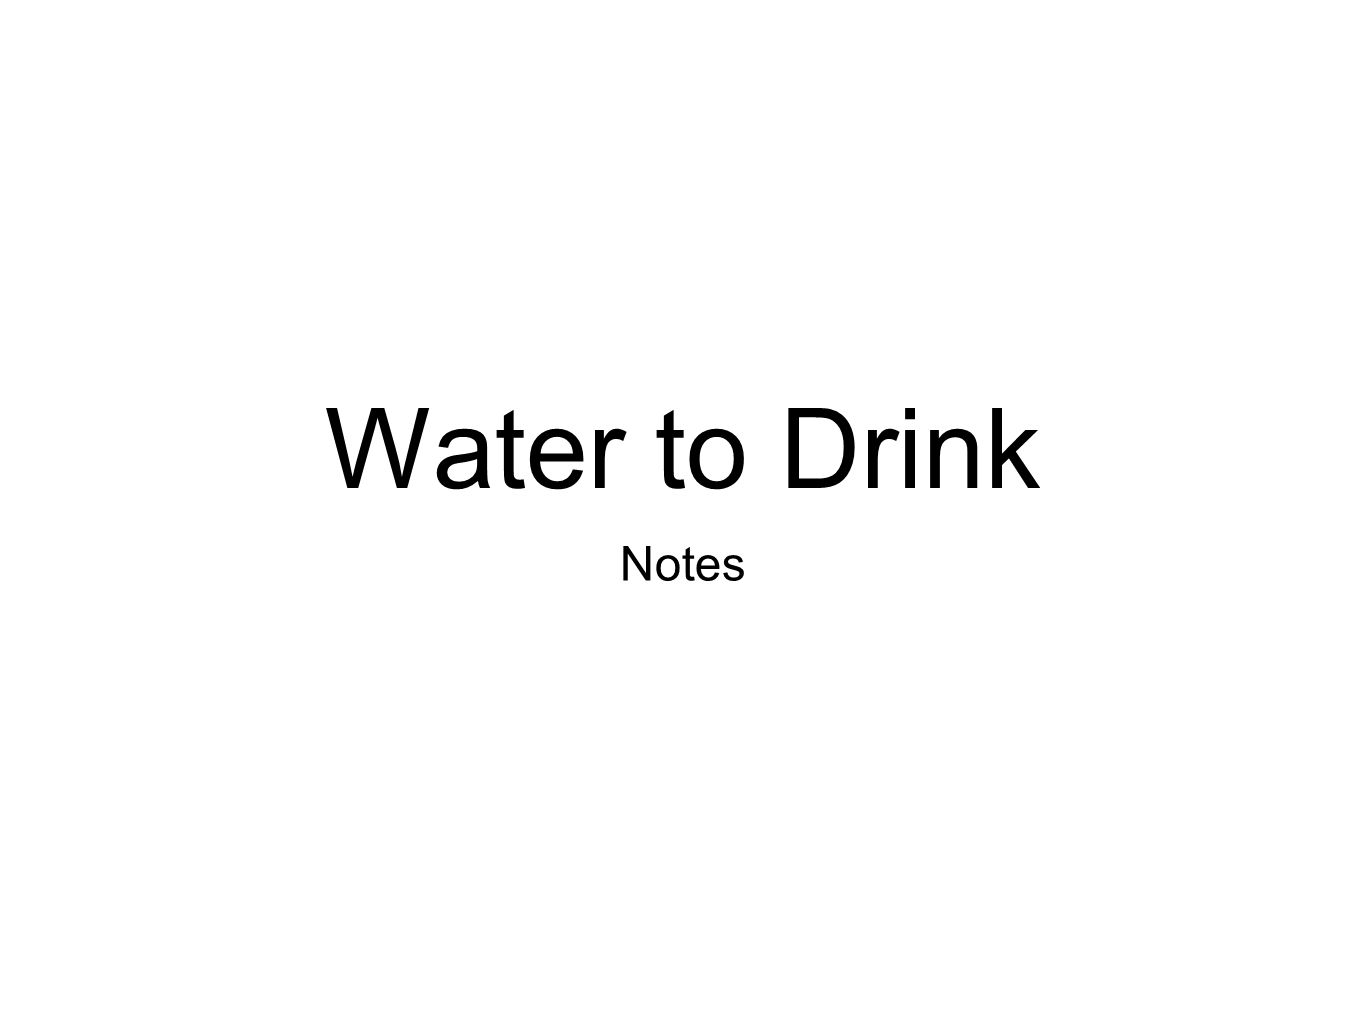 Water to Drink Notes